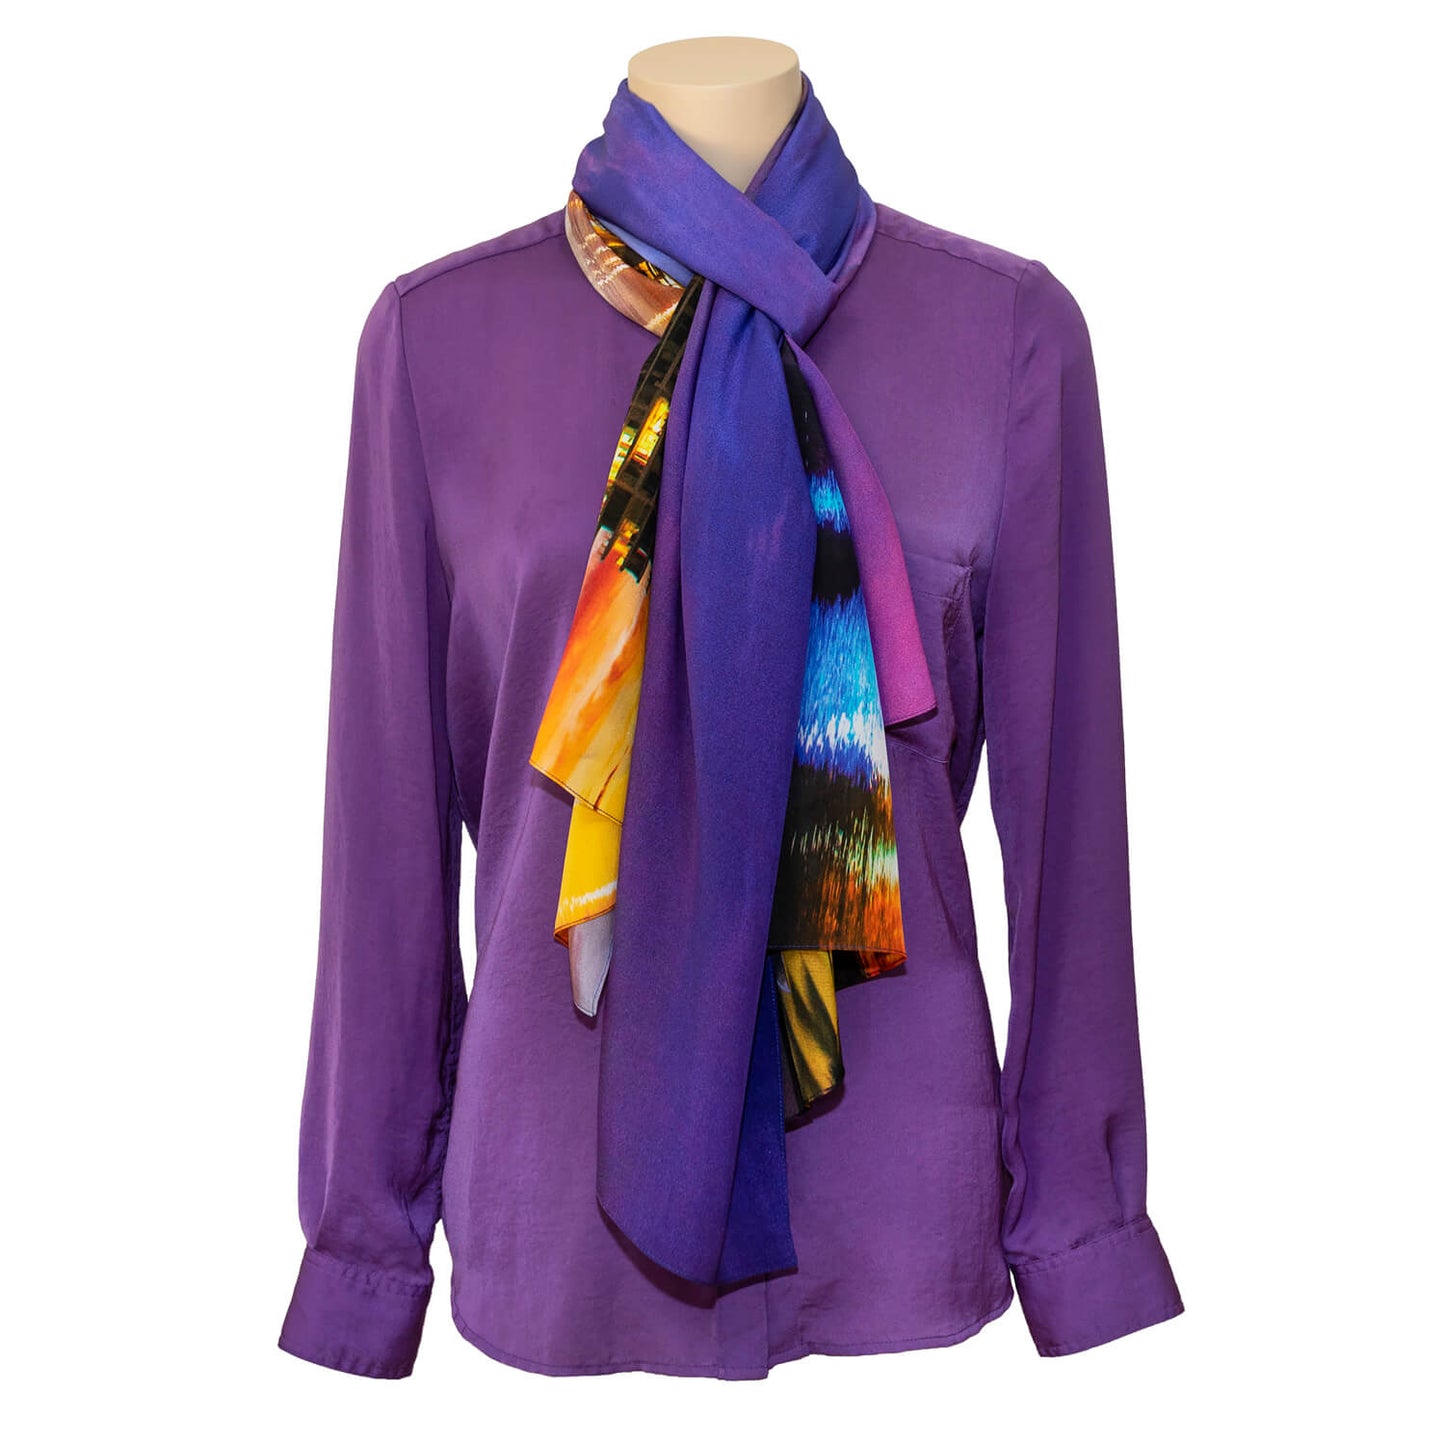 dusk on the inlet silk scarf with purple shirt